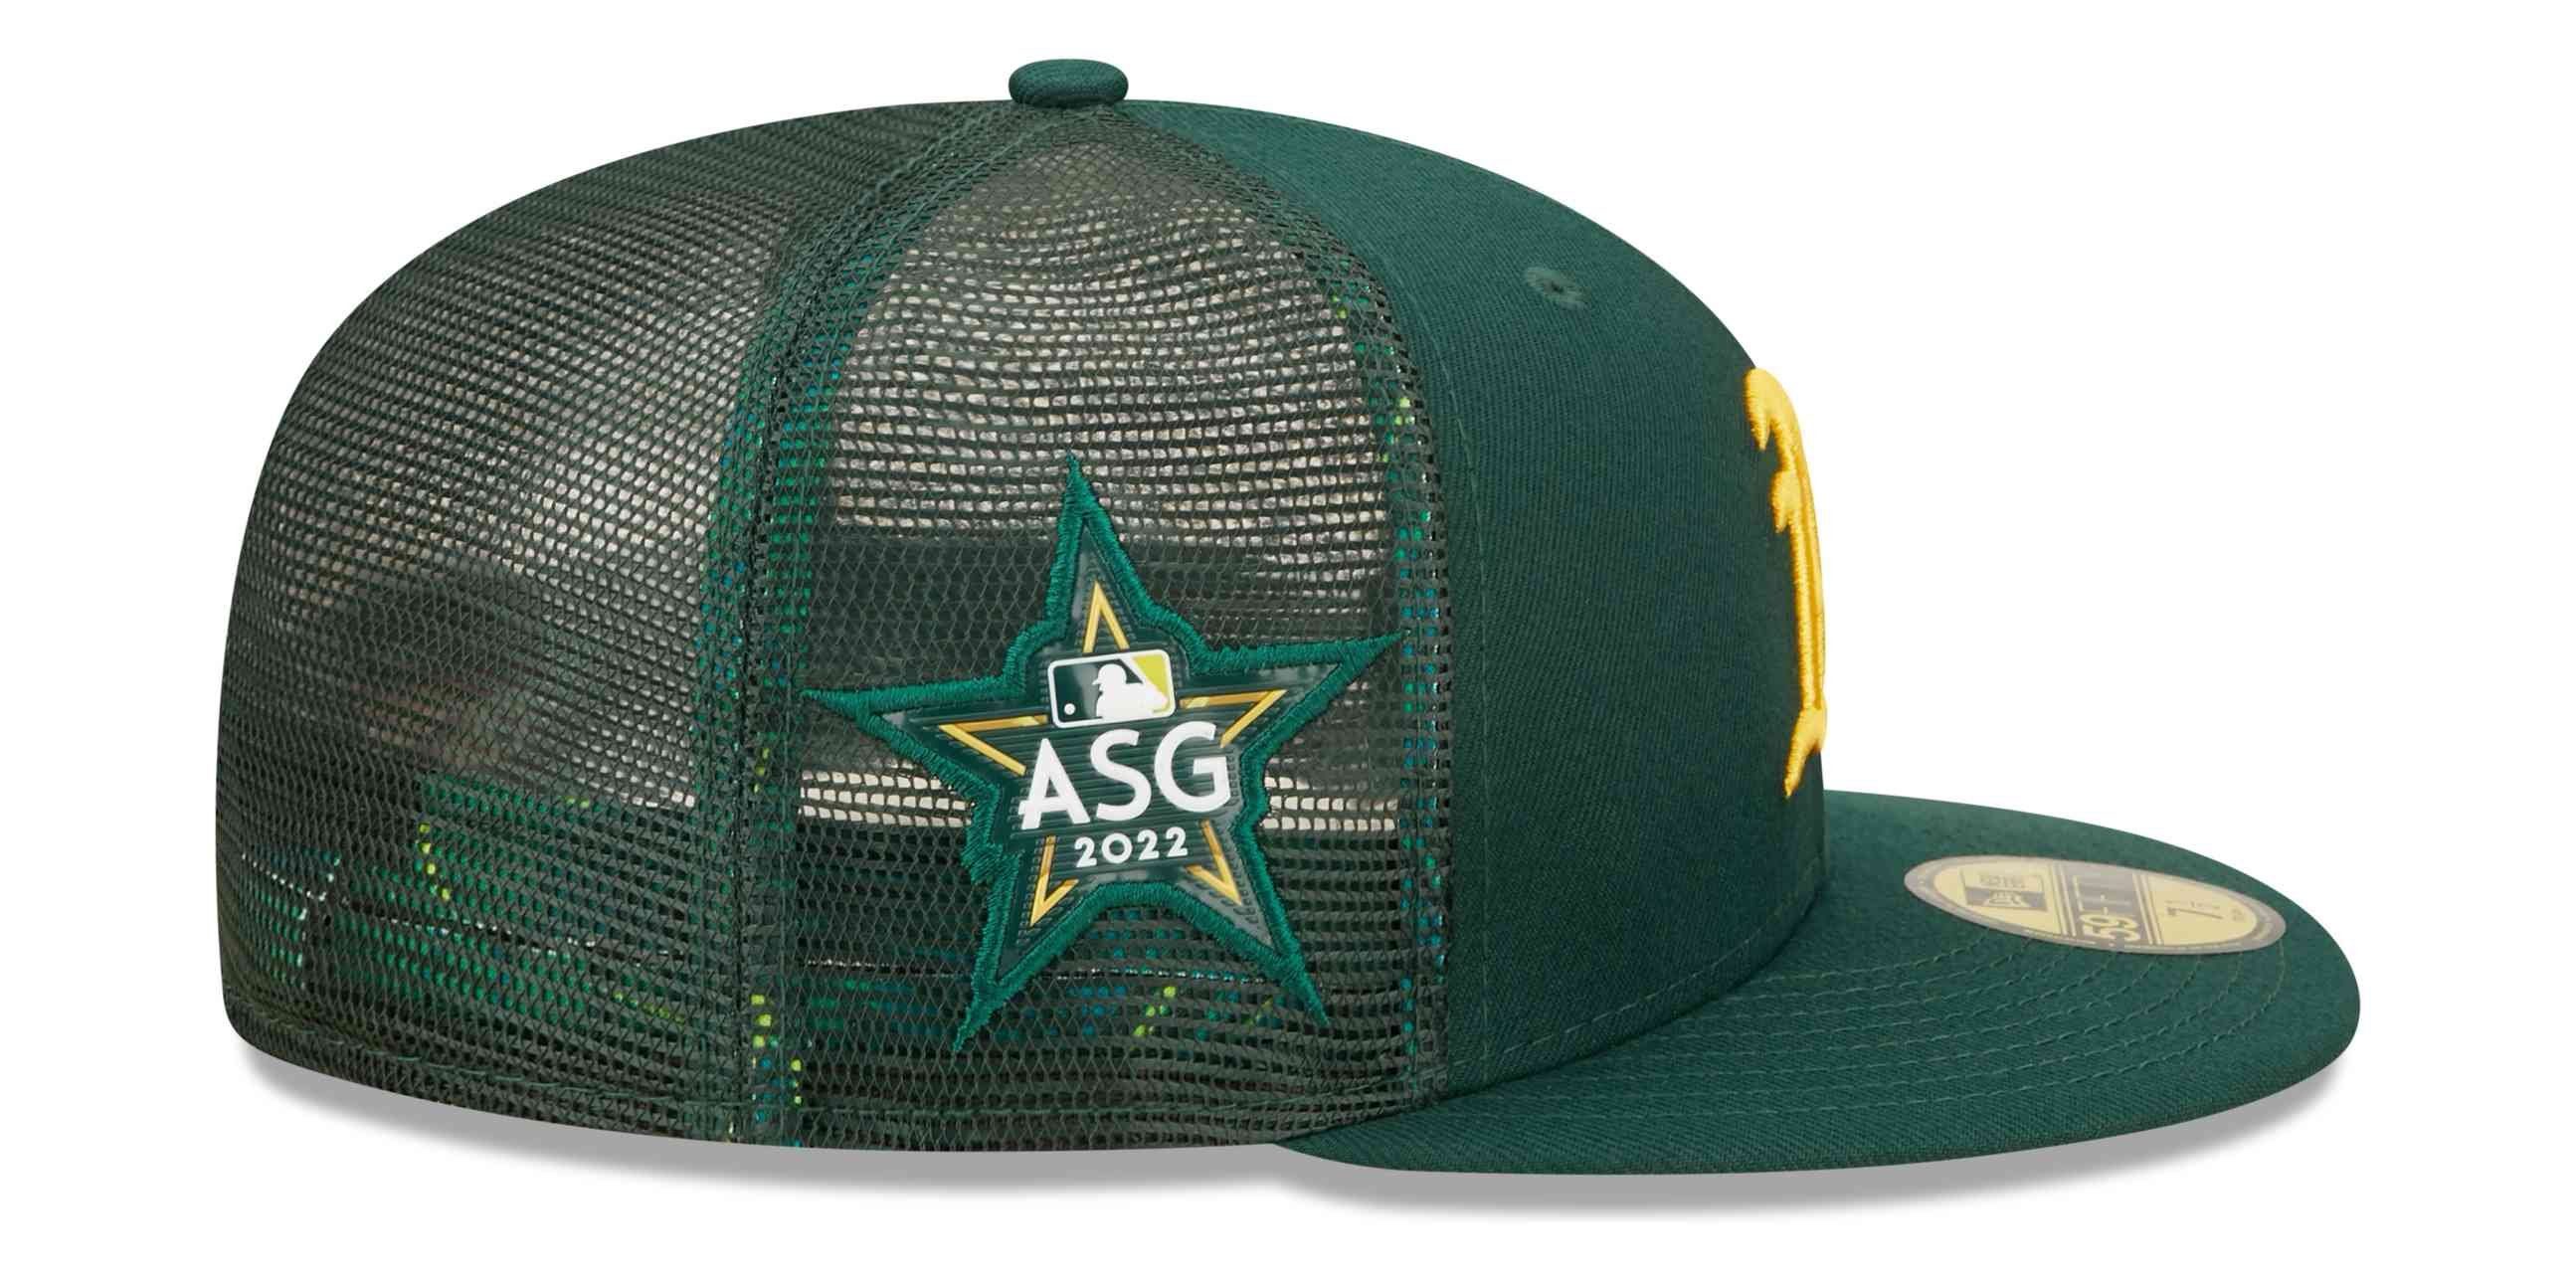 Athletics Game Oakland Cap 59Fifty Era 2022 Star Fitted New All MLB